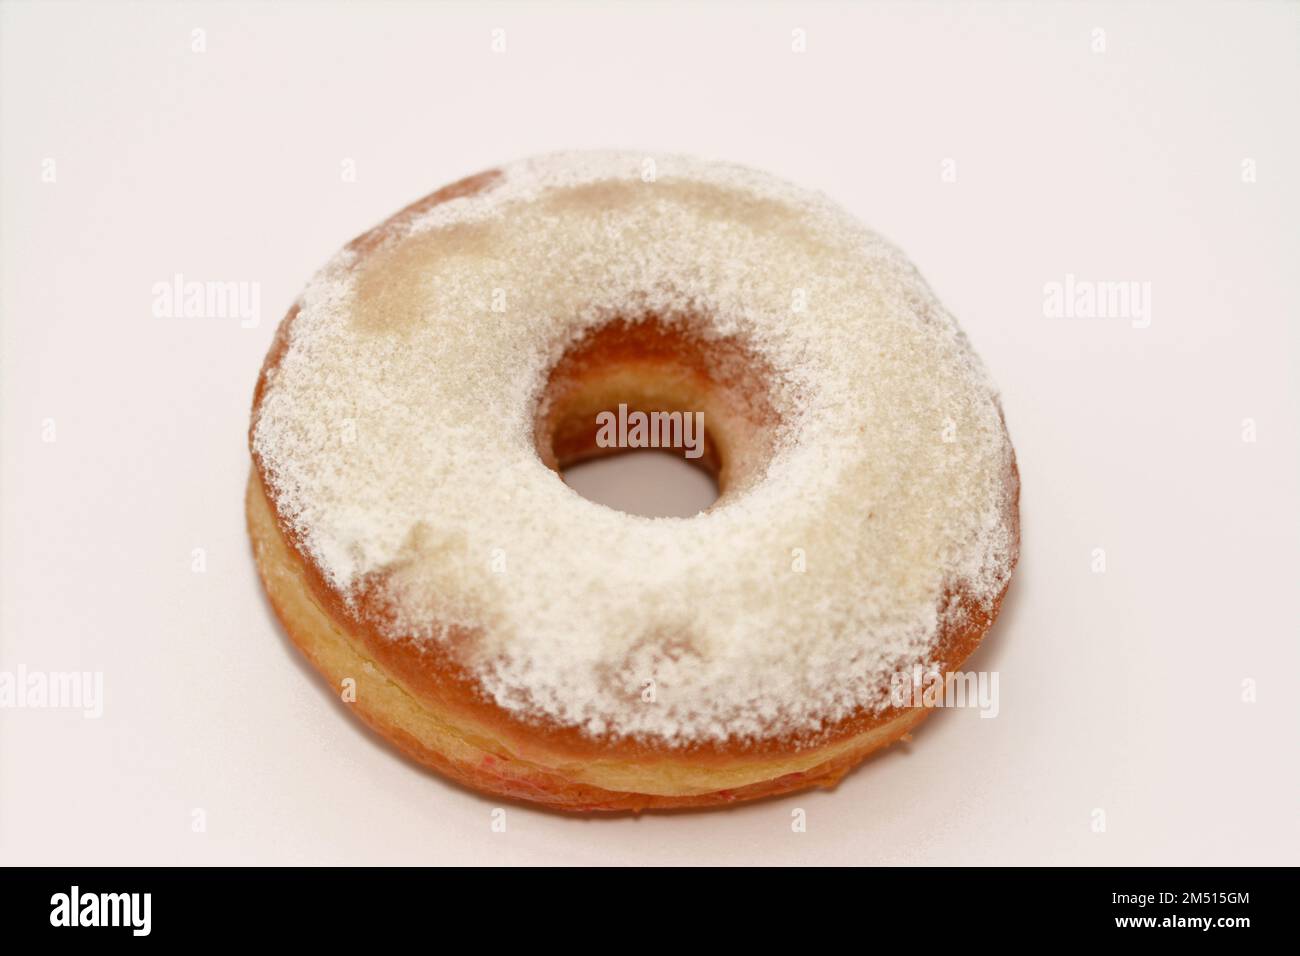 Powdered icing sugar ring donut, A glazed, yeast raised, American style ring doughnut with topping of confectioners' finely ground sugar, type of food Stock Photo